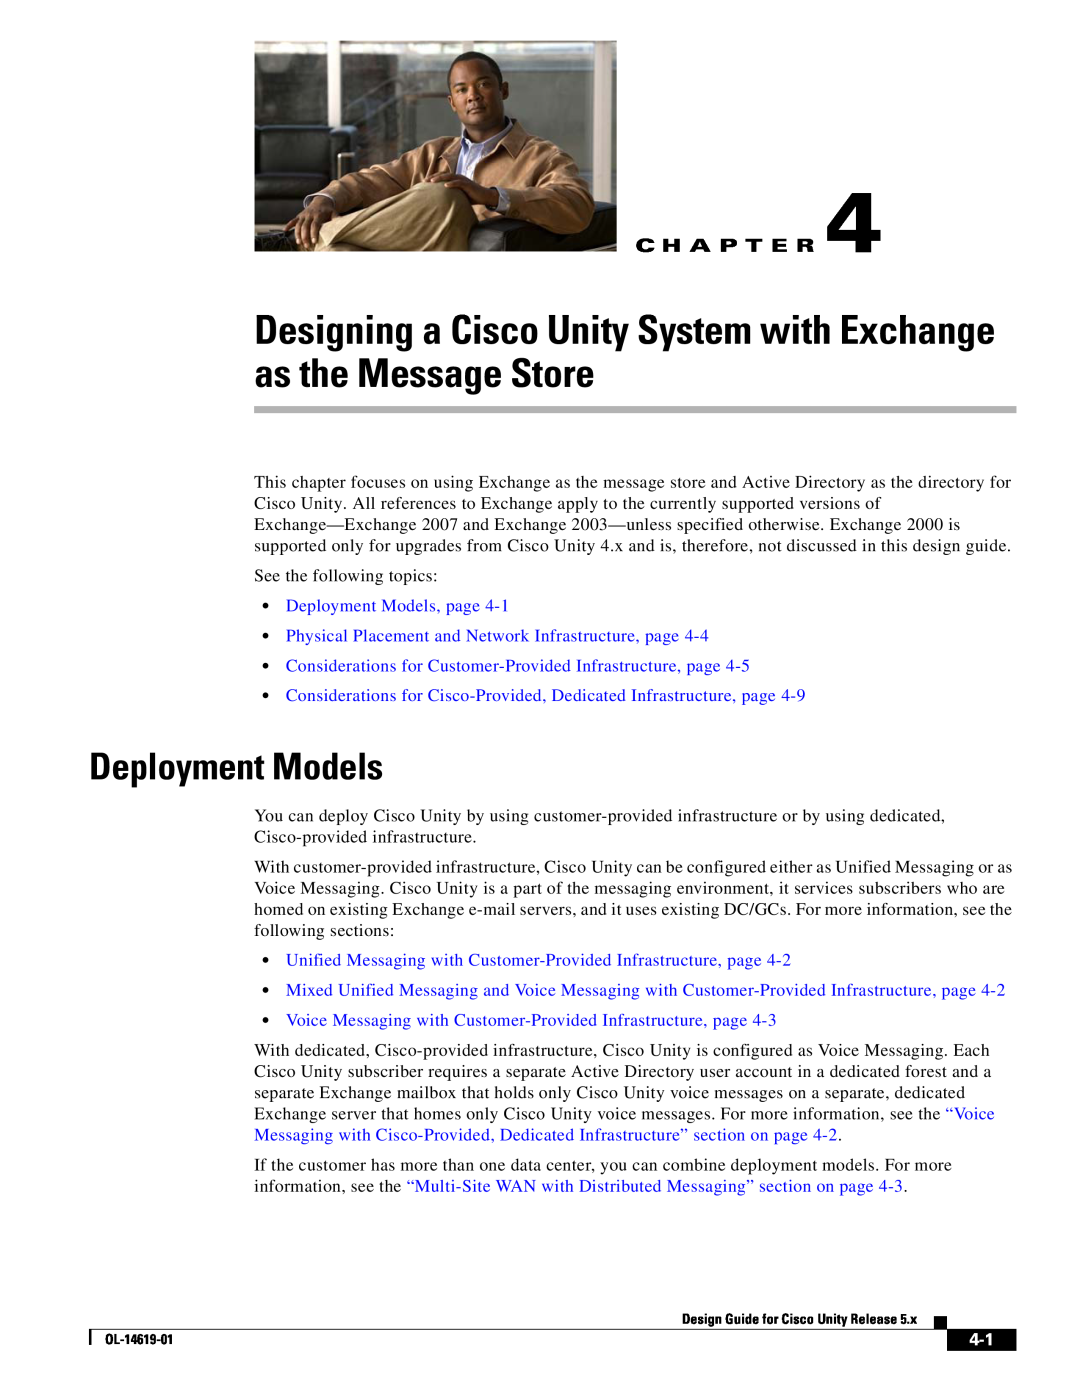 Cisco Systems OL-14619-01 manual Designing a Cisco Unity System with Exchange as the Message Store, Deployment Models 